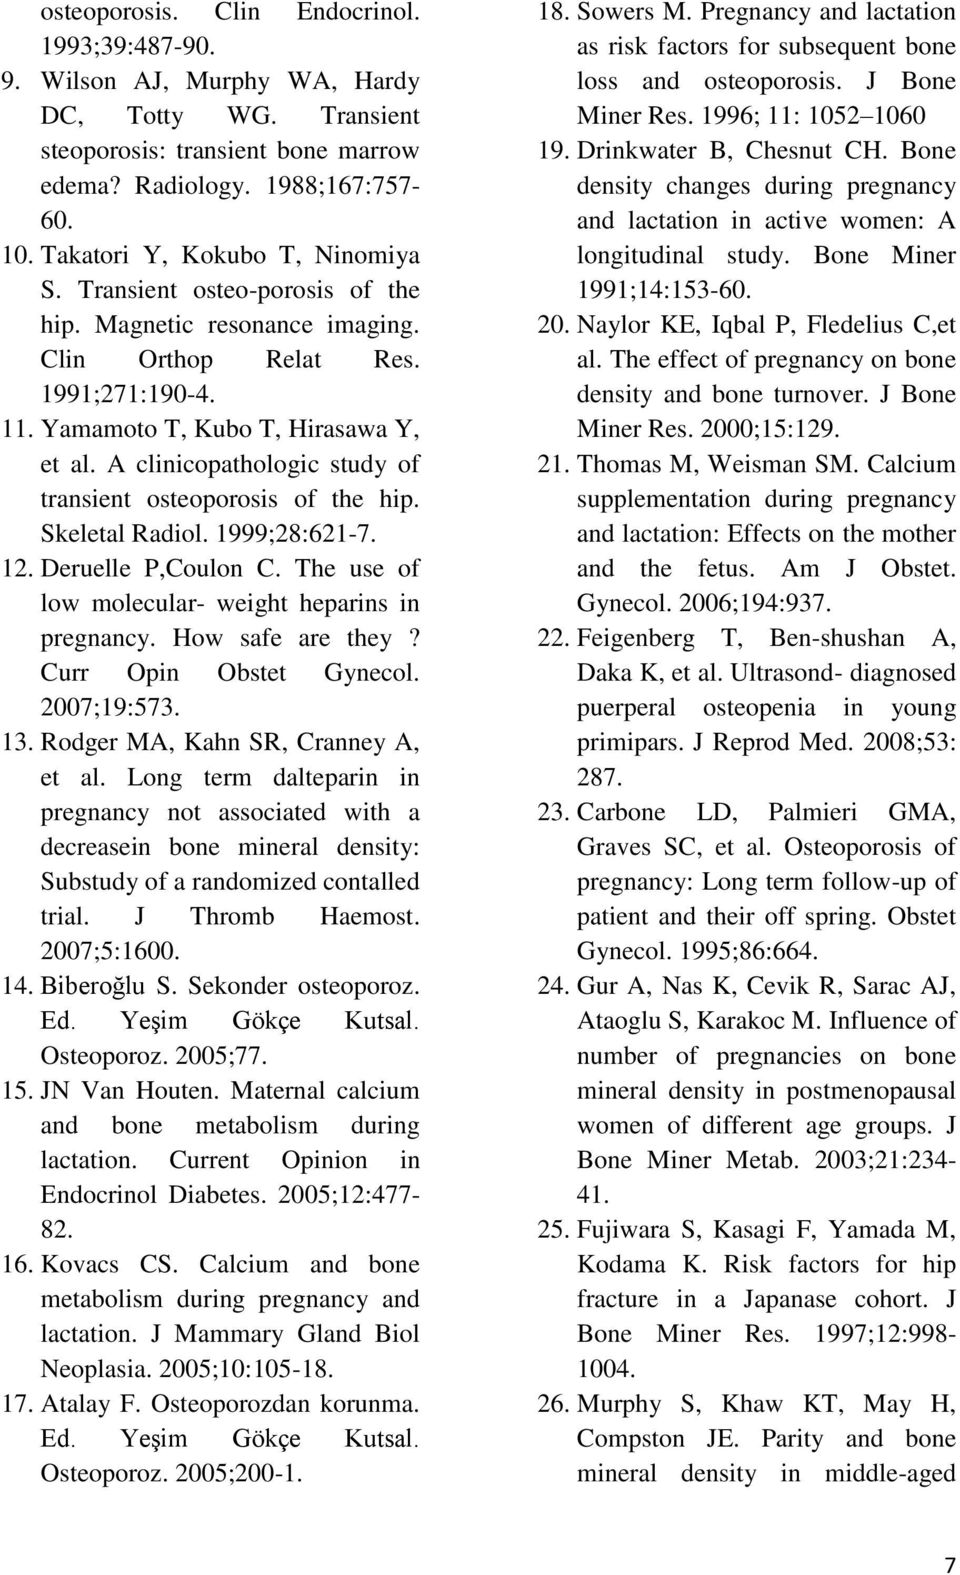 A clinicopathologic study of transient osteoporosis of the hip. Skeletal Radiol. 1999;28:621-7. 12. Deruelle P,Coulon C. The use of low molecular- weight heparins in pregnancy. How safe are they?